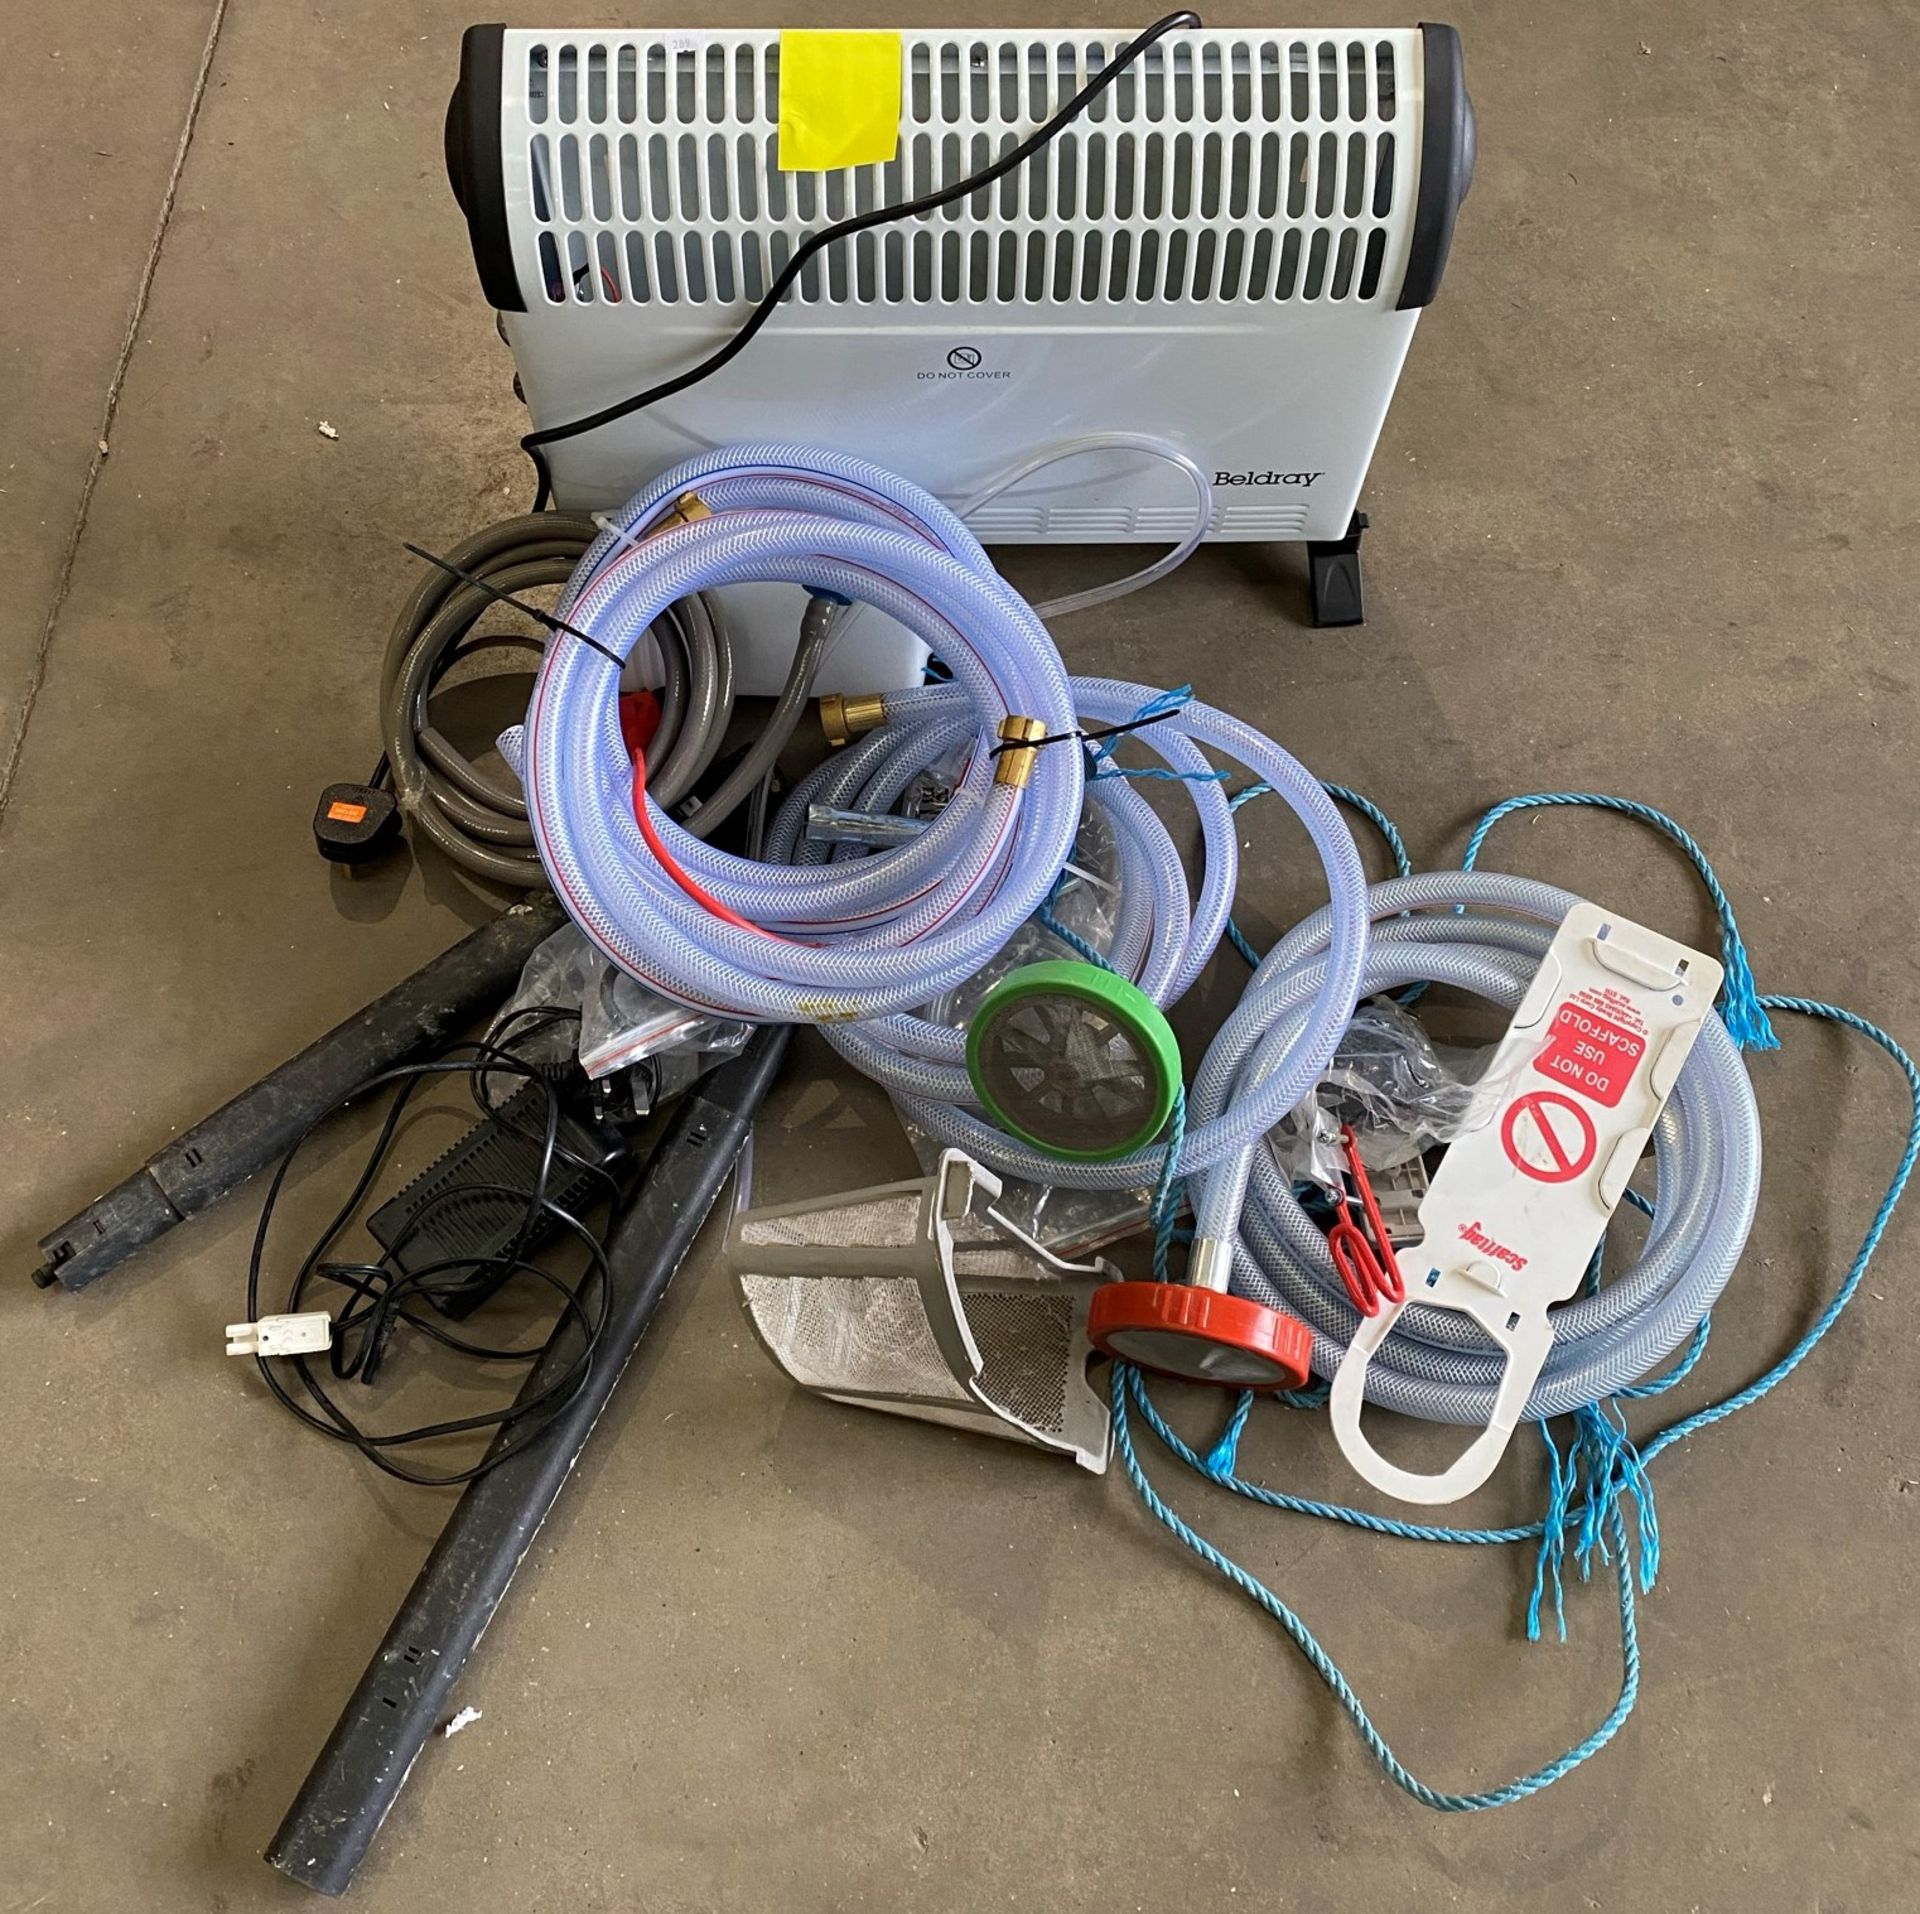 Contents to box - Assorted hoses, heater, power pack,